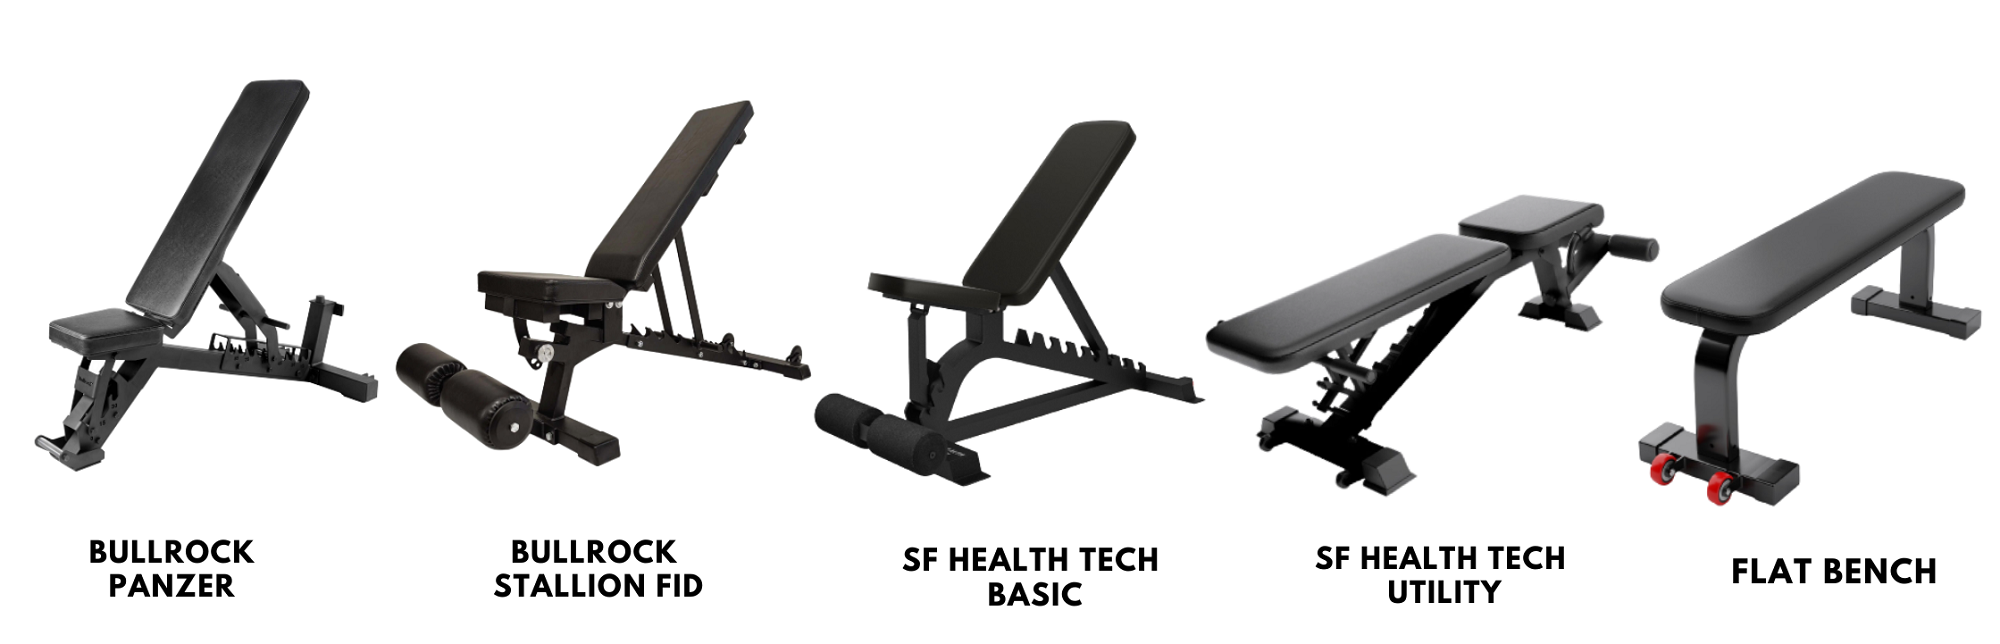 Buying a WEIGHT bench in India?